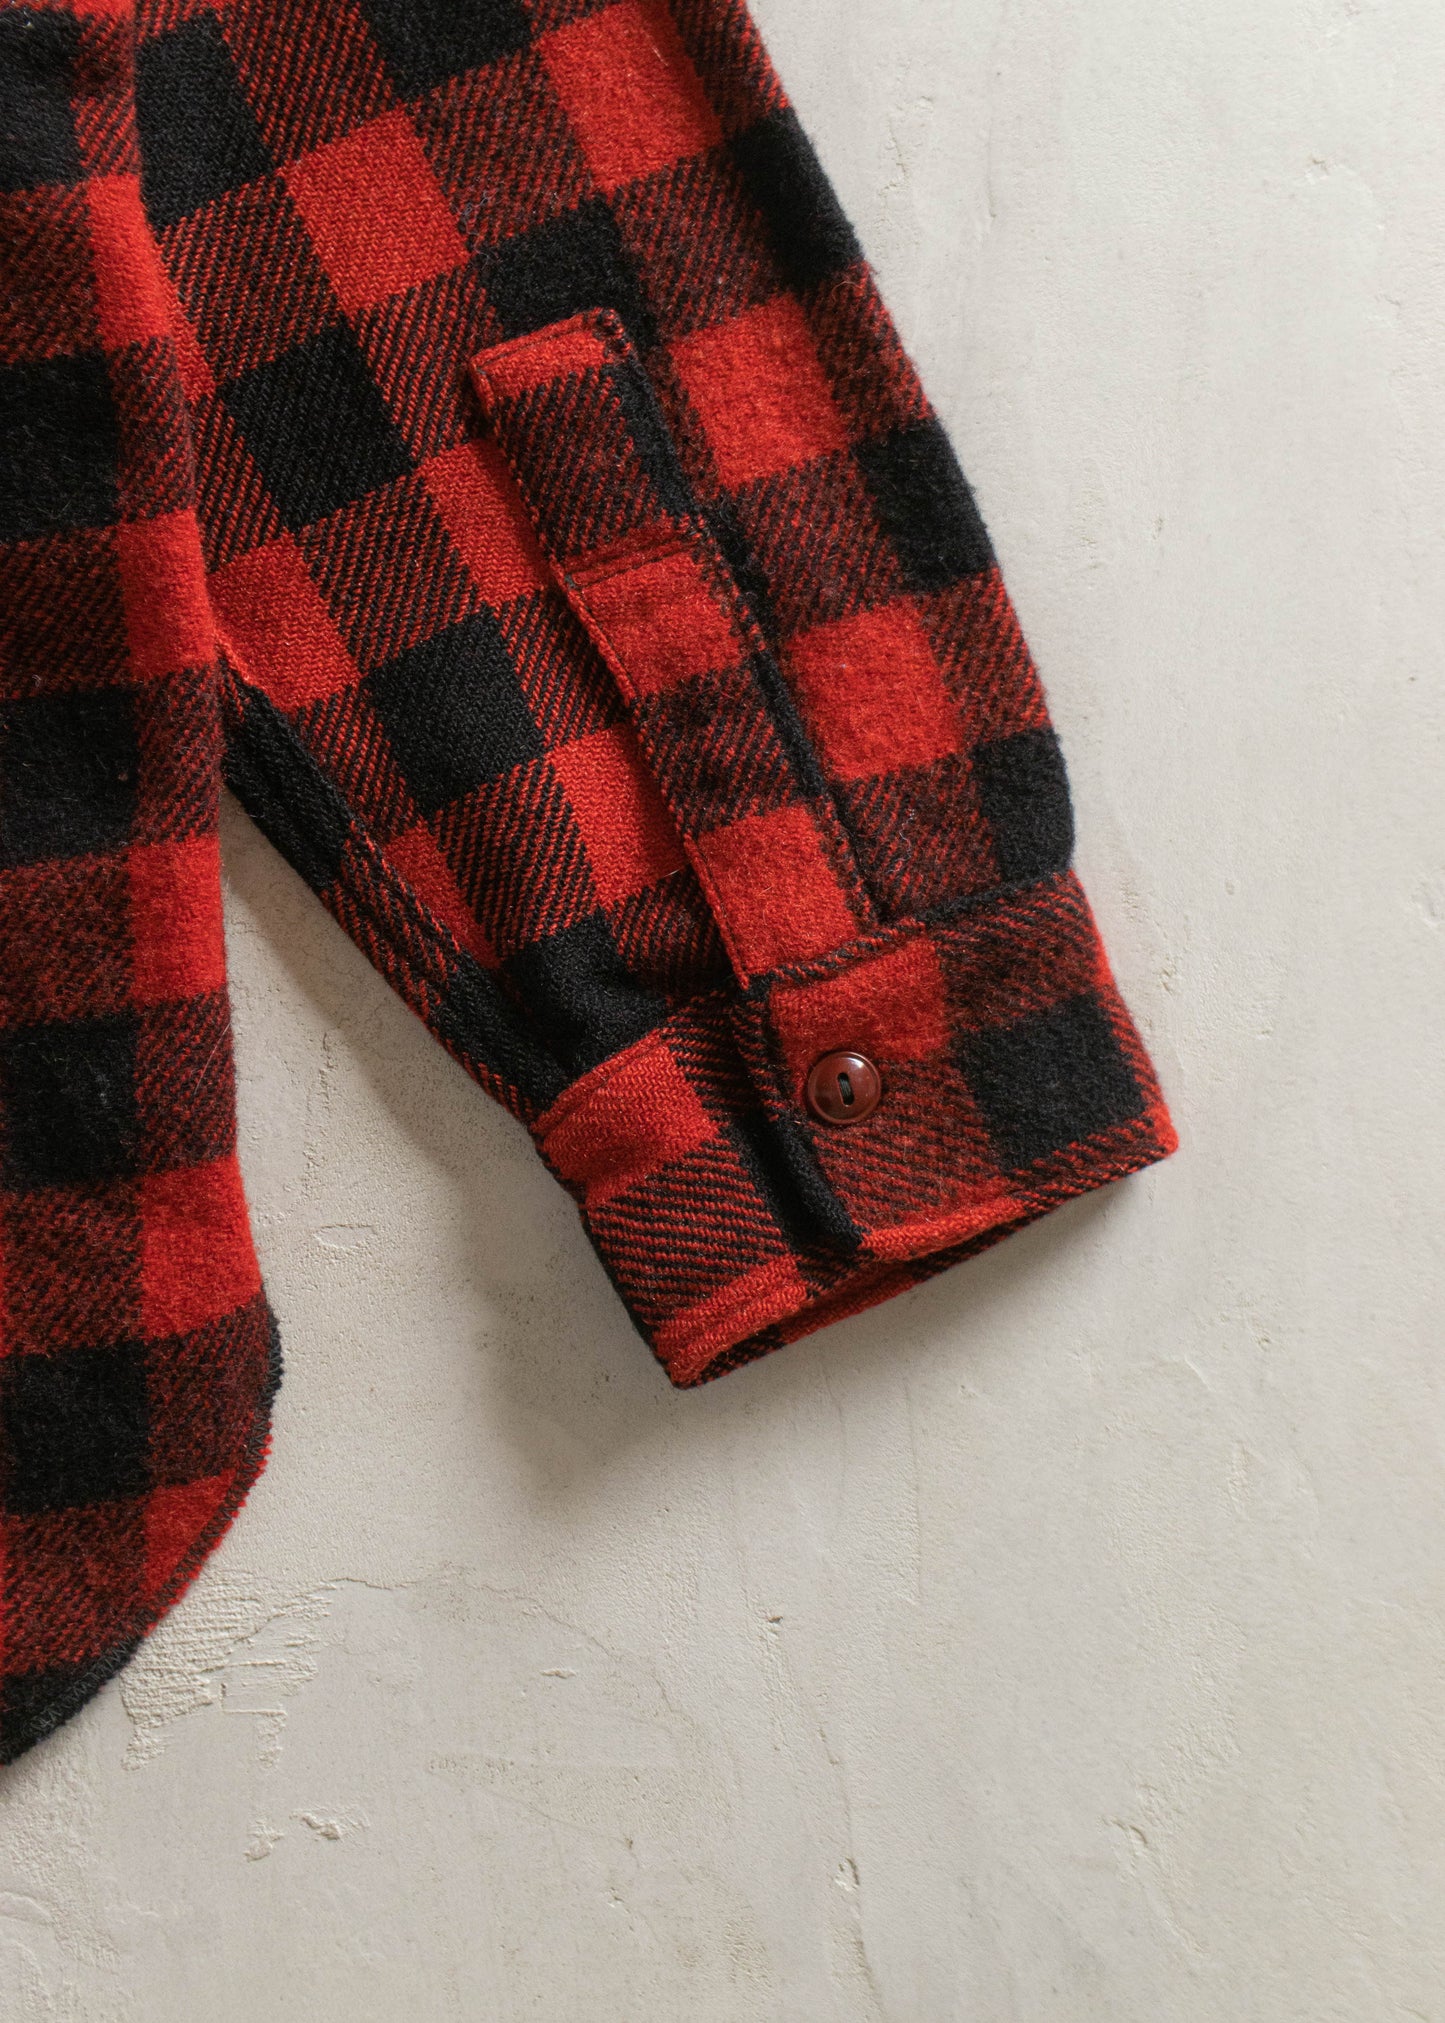 Vintage 1970s Woolrich Flannel Button Up Shirt Size Size S/M